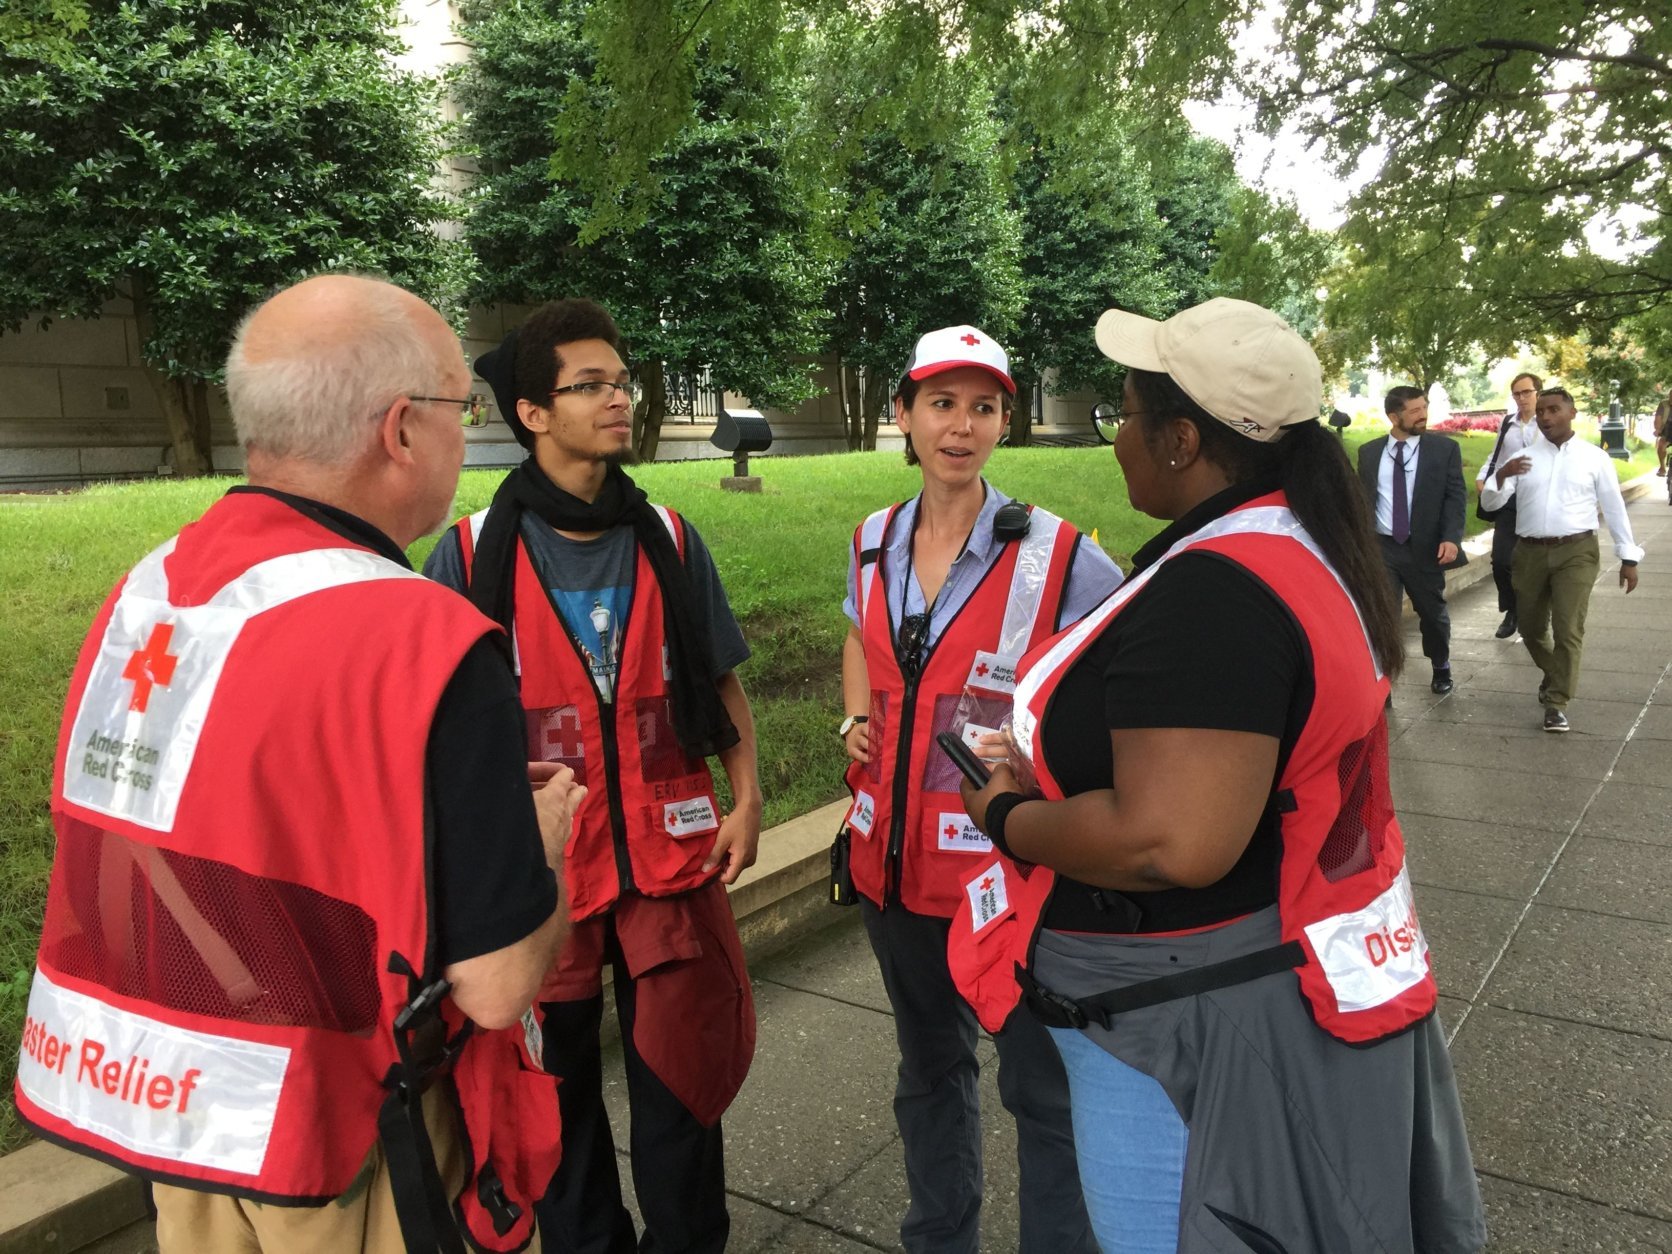 Volunteers with the American Red Cross coordinate to assist people  in line for the Rotunda who may be struggling in the late-summer heat. (WTOP/Kristi King)